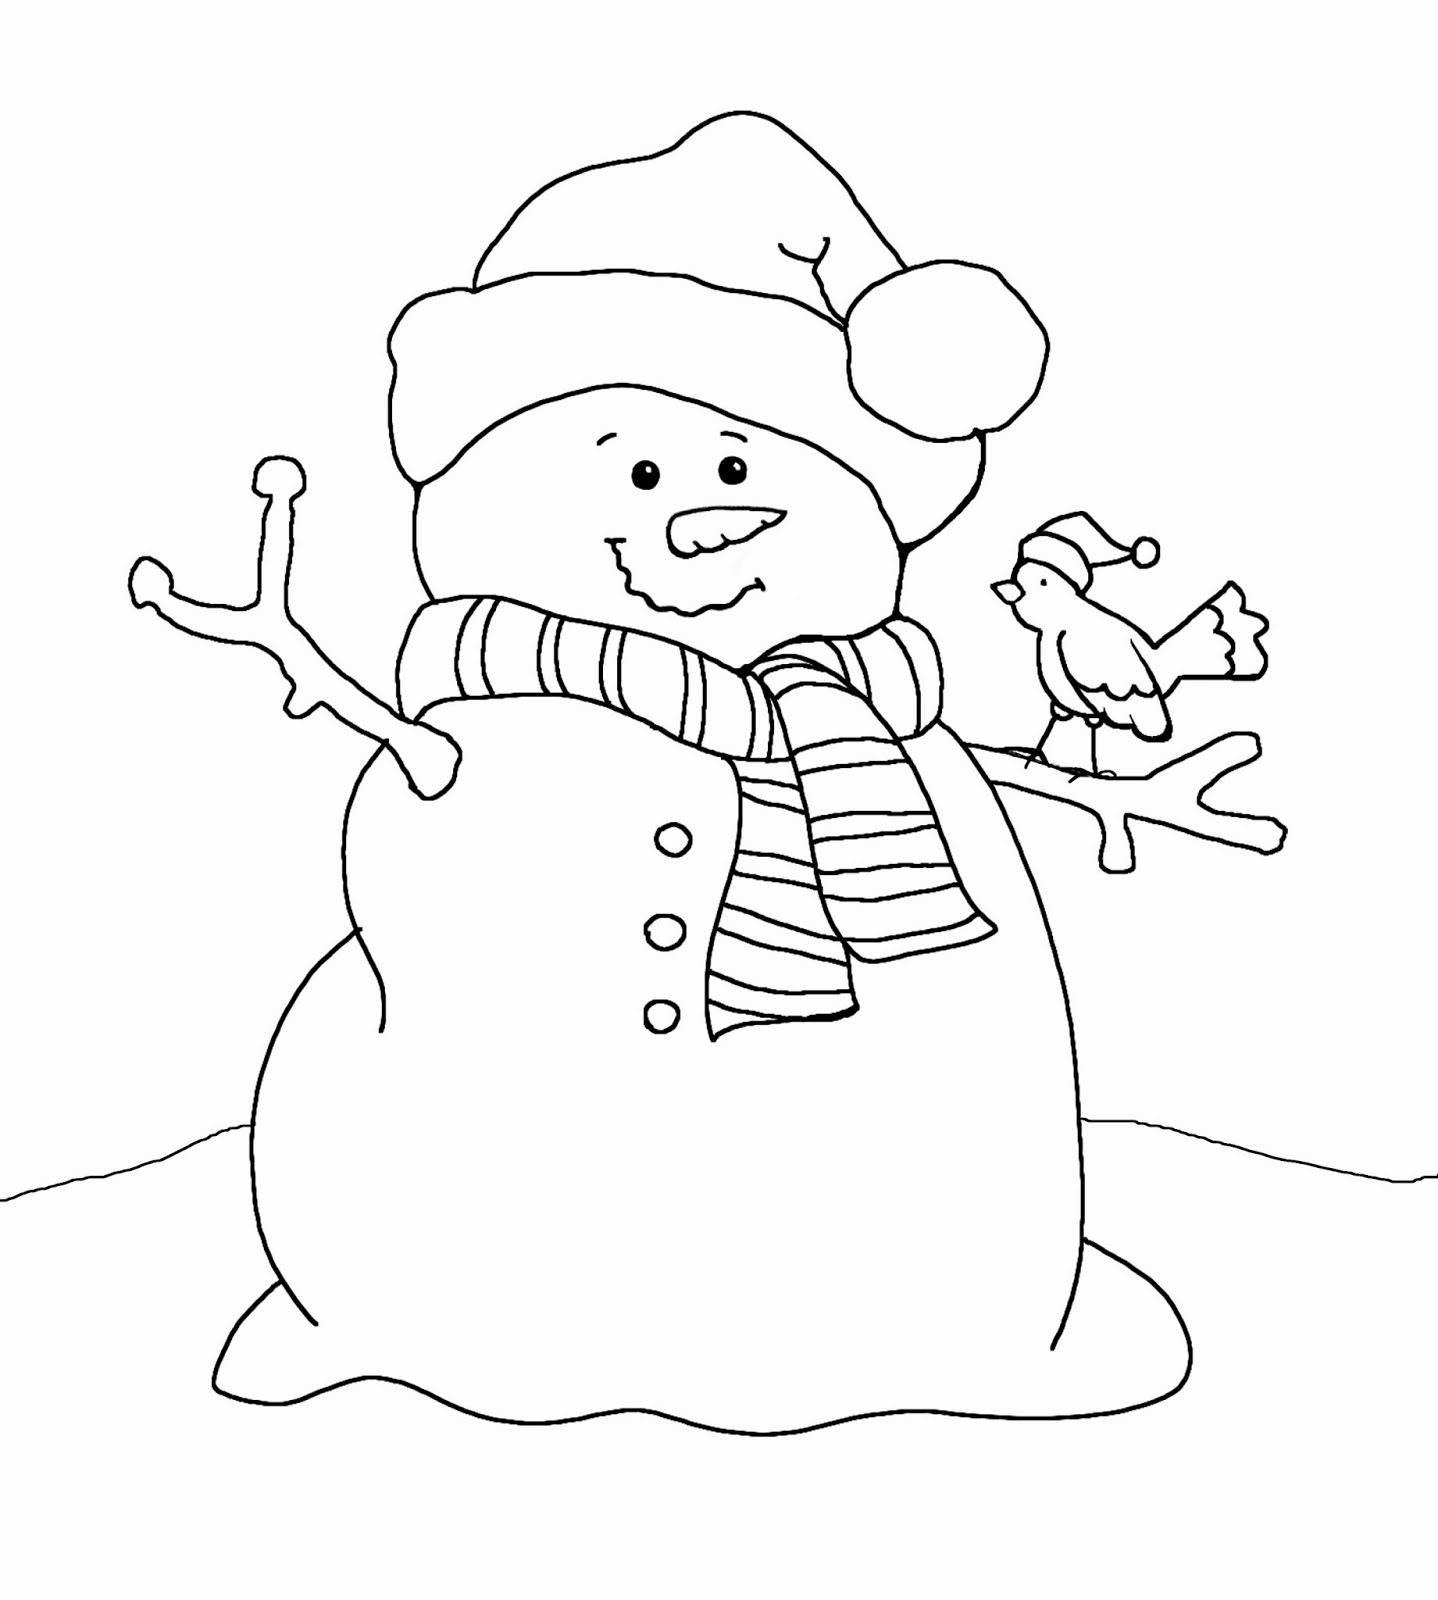 cute-snowman-coloring-pages-at-getcolorings-free-printable-colorings-pages-to-print-and-color